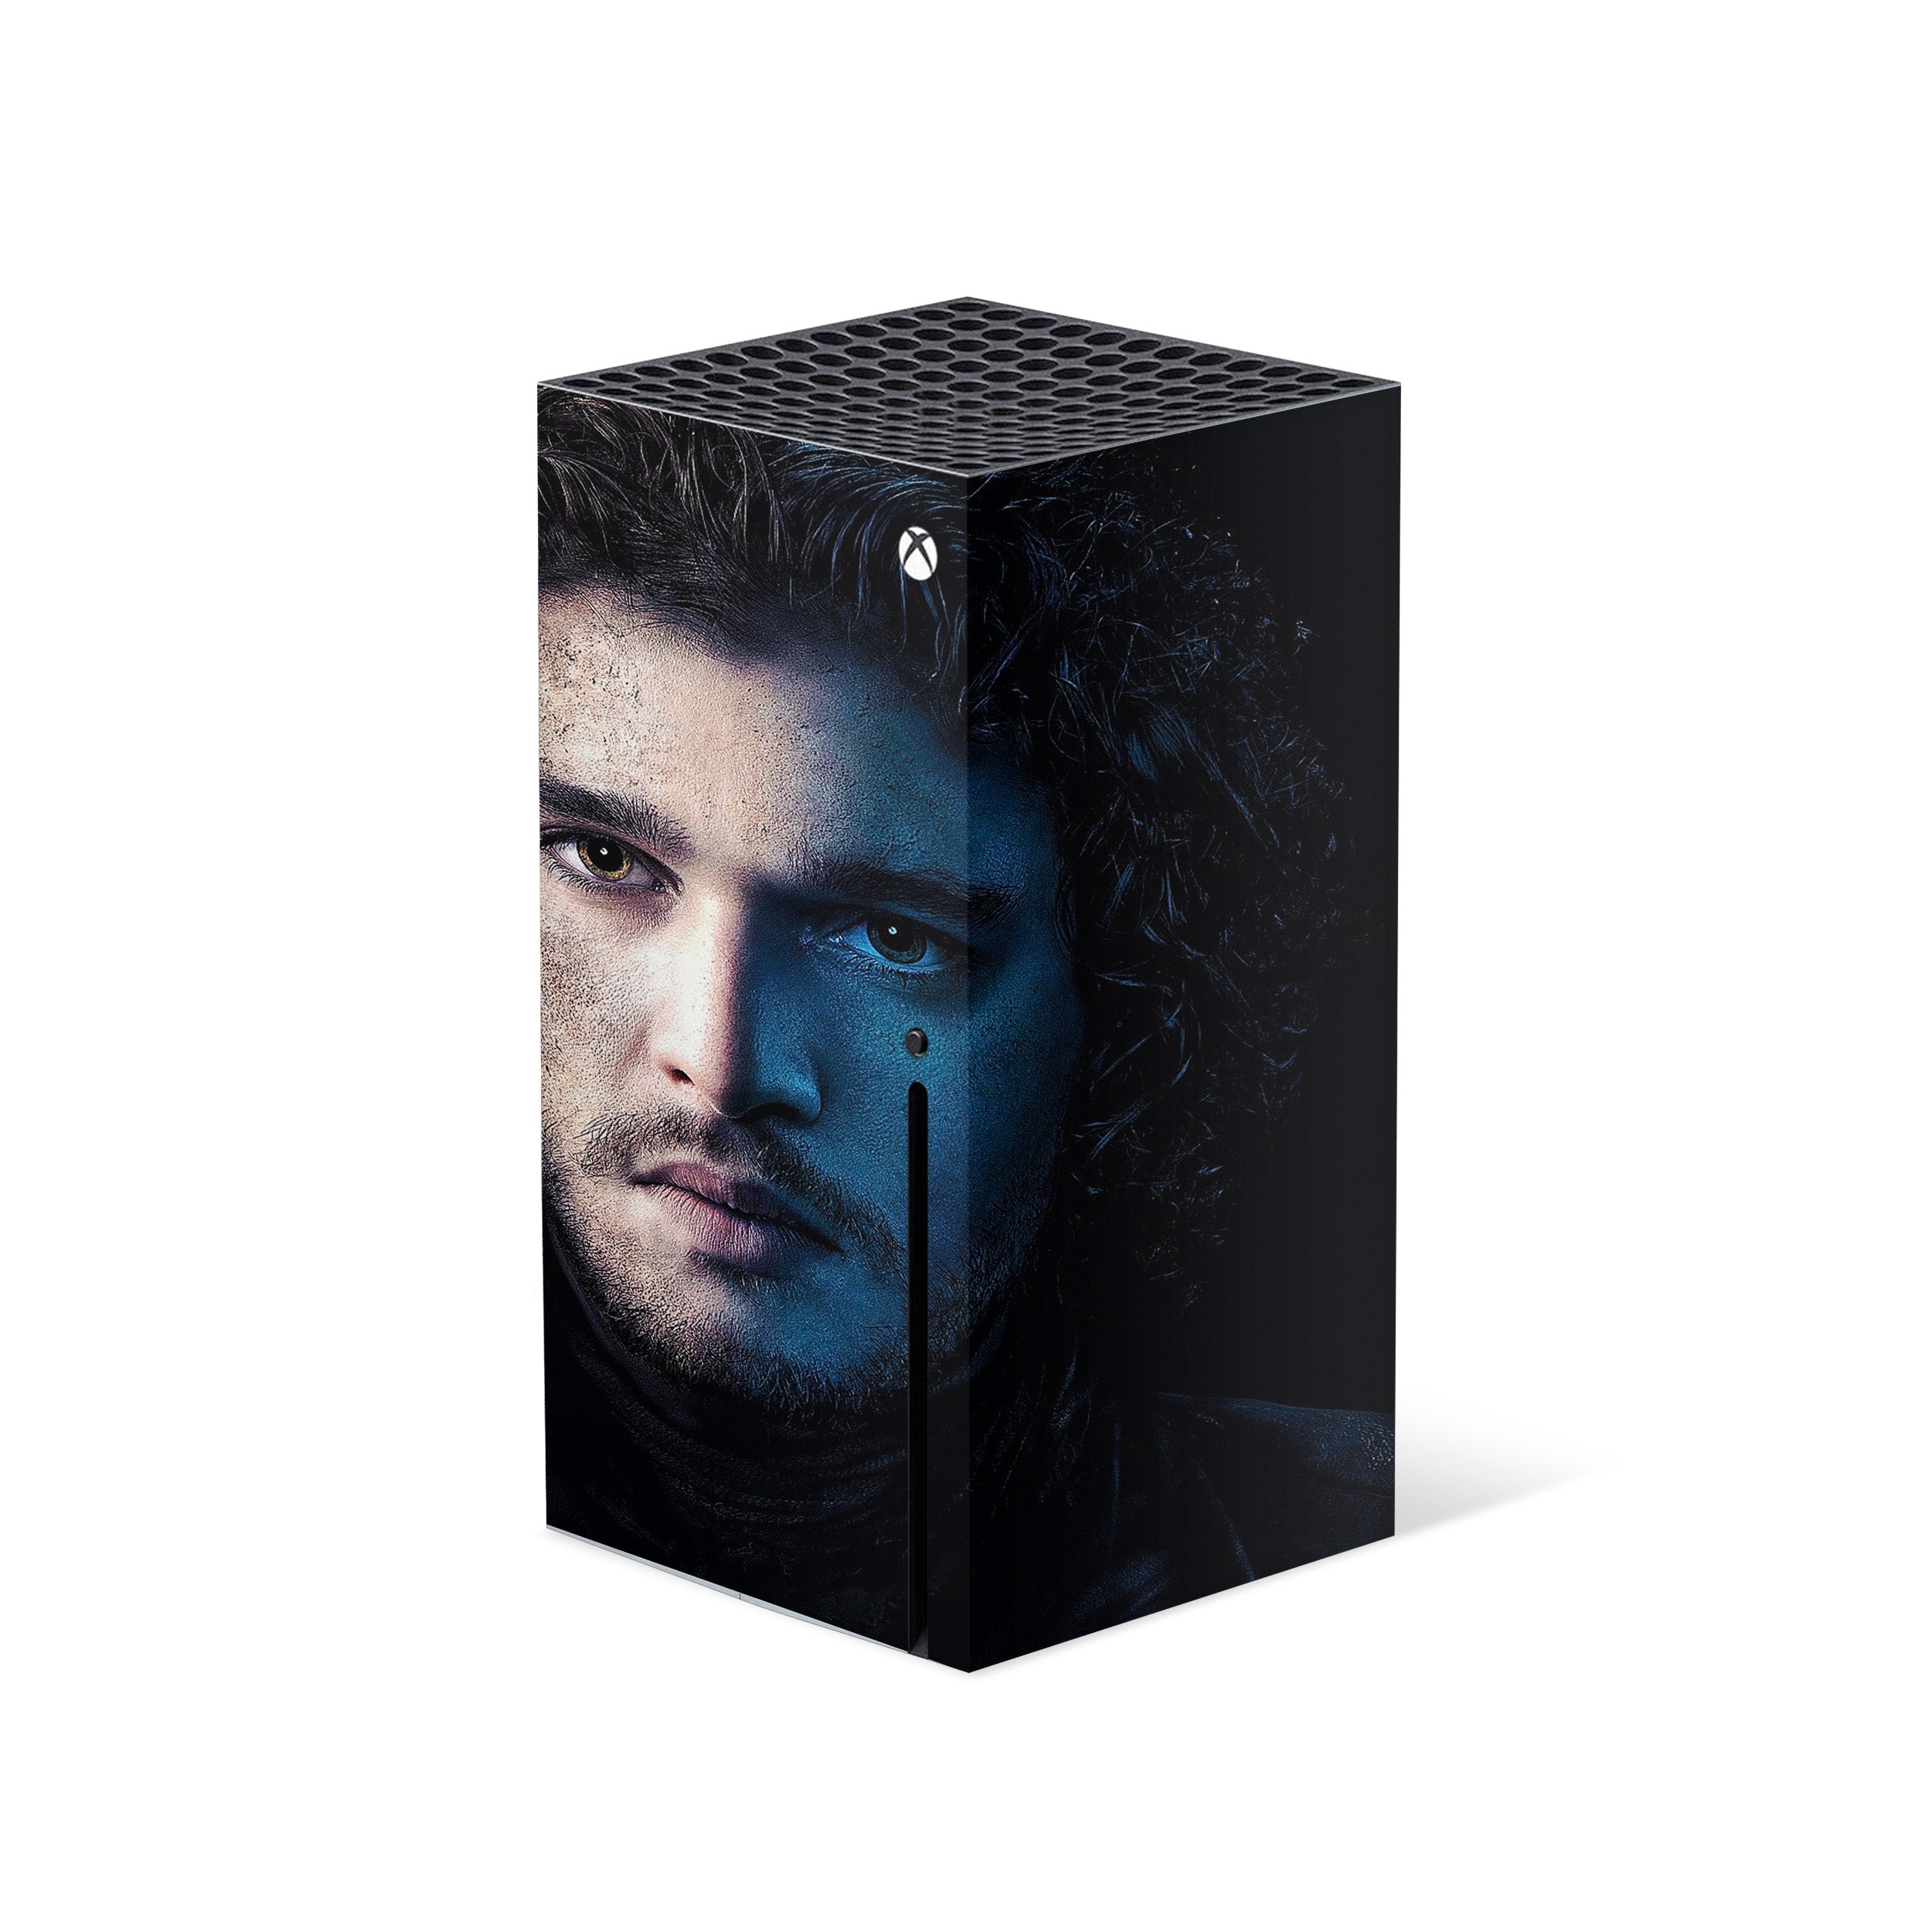 A video game skin featuring a Game Of Thrones Jon Snow design for the Xbox Series X.